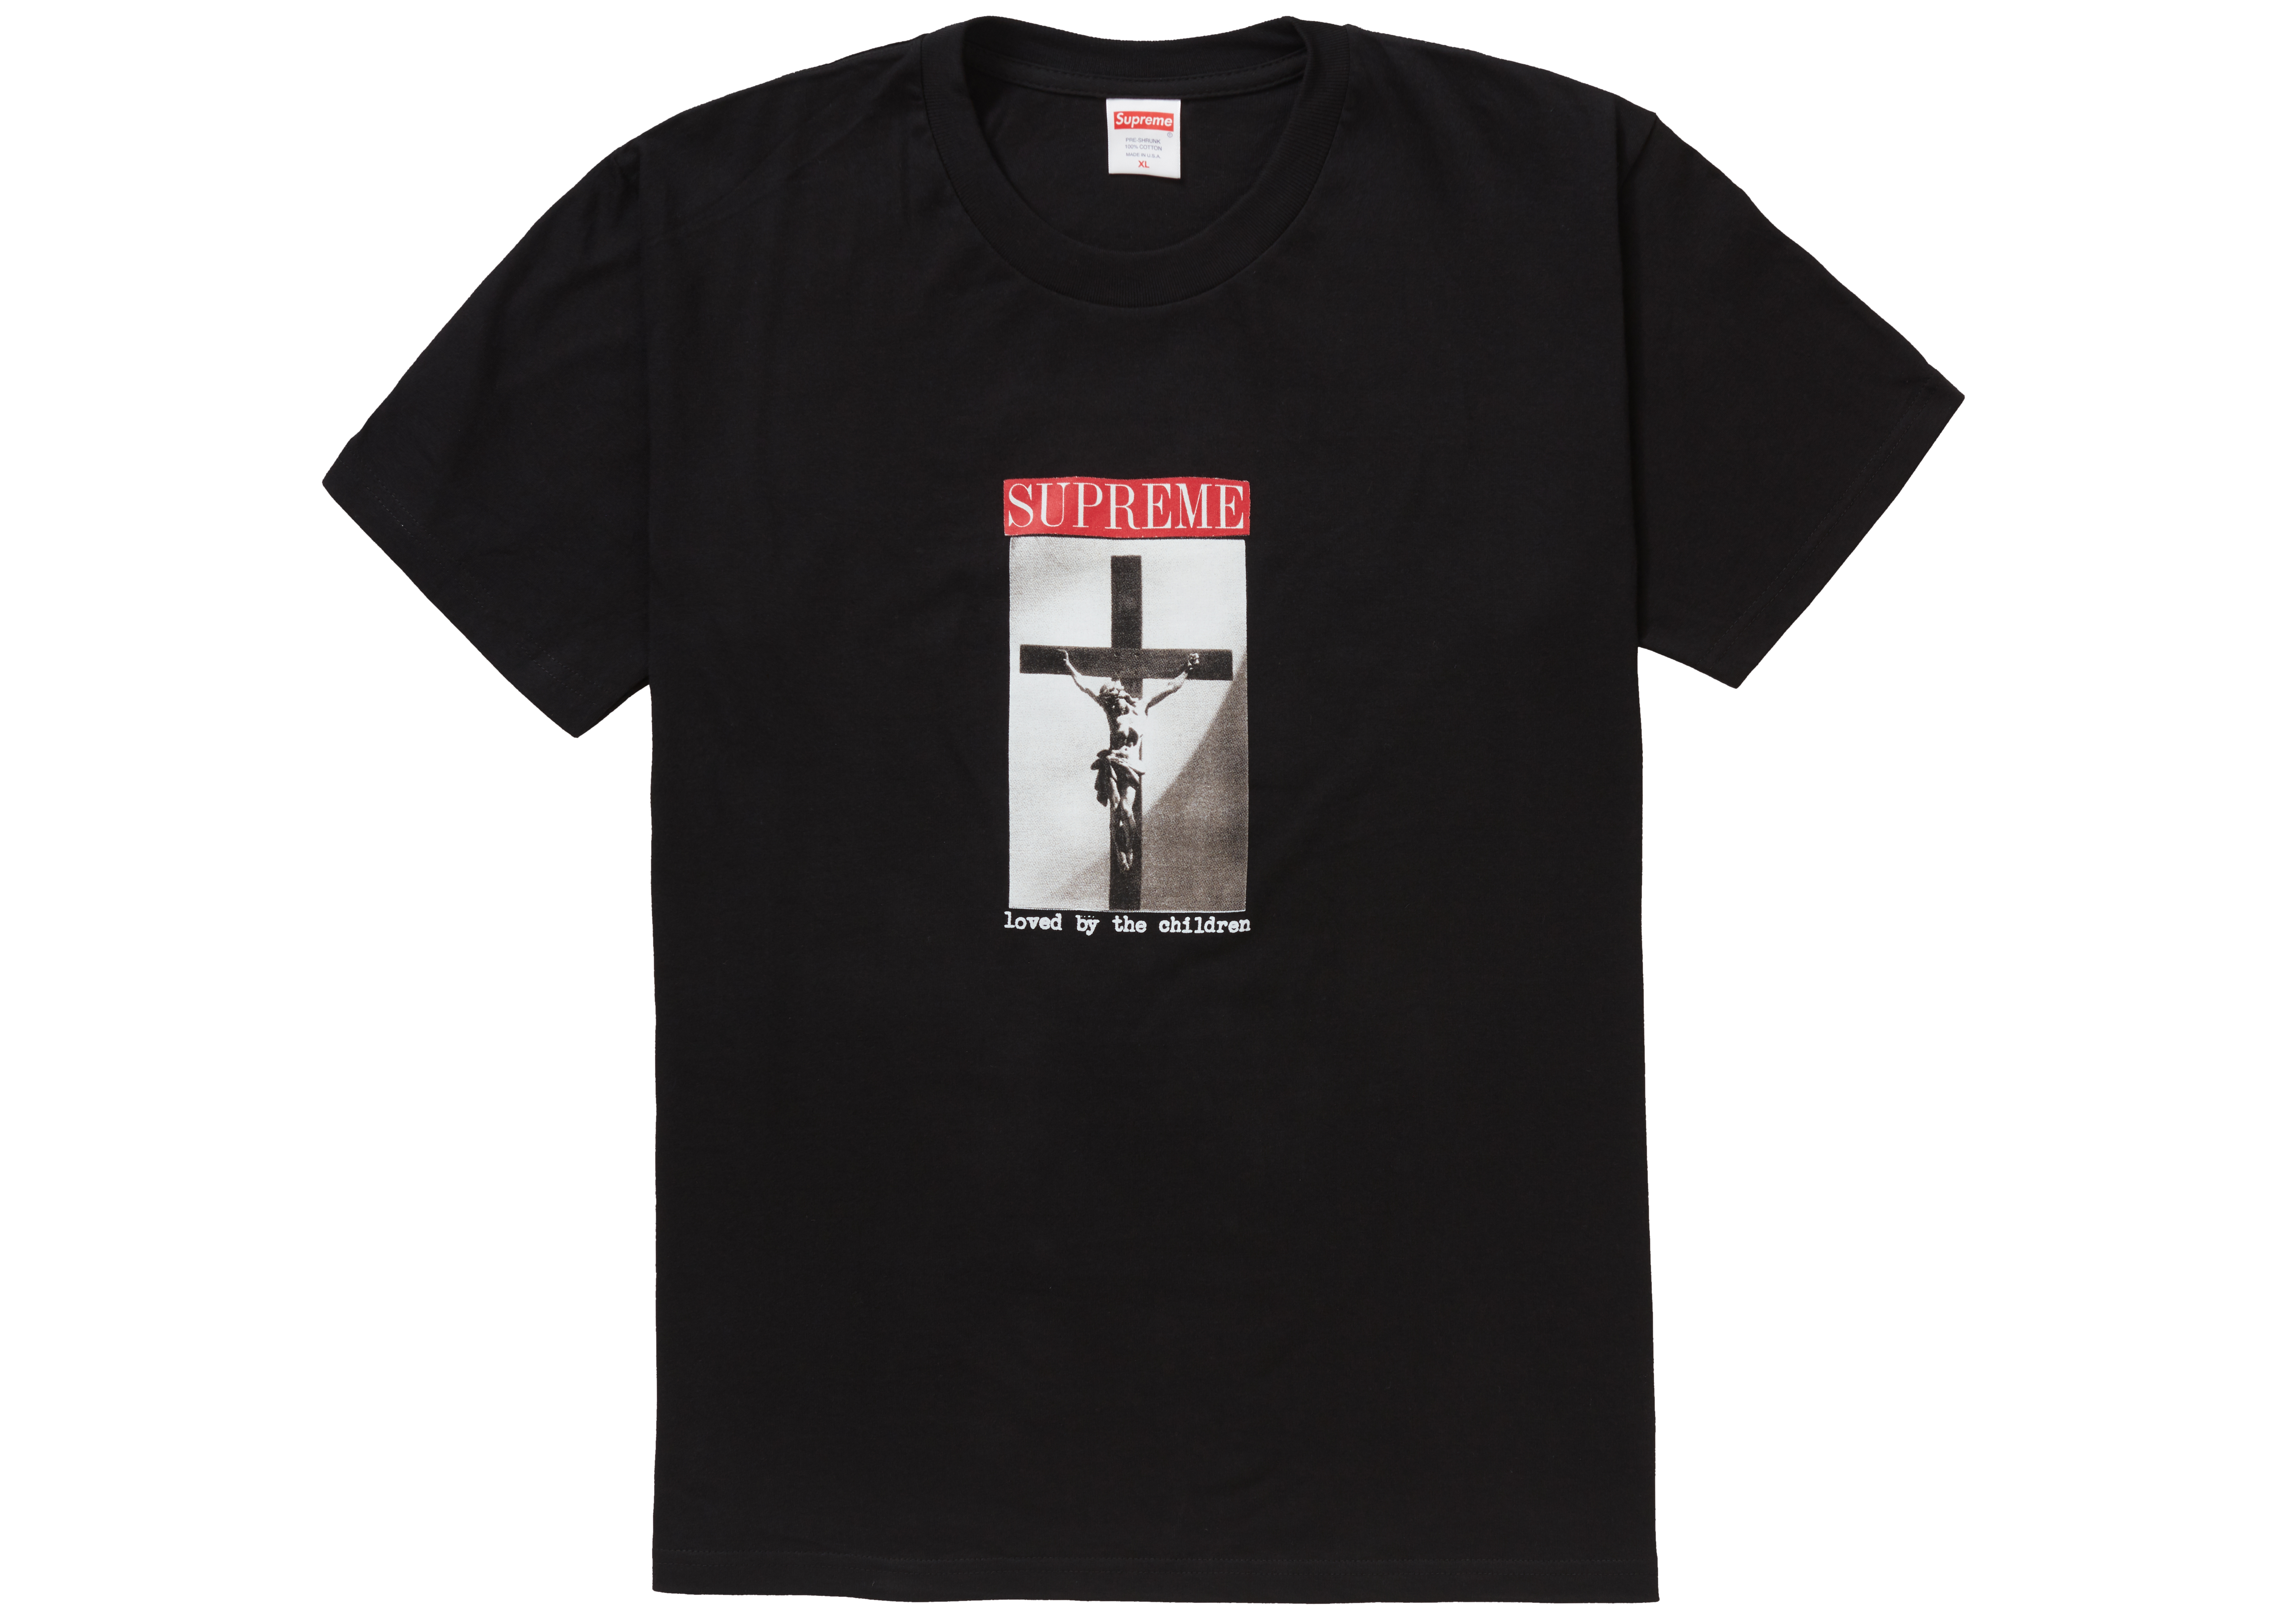 Supreme Loved By The Children Tee Black Men's - SS20 - US